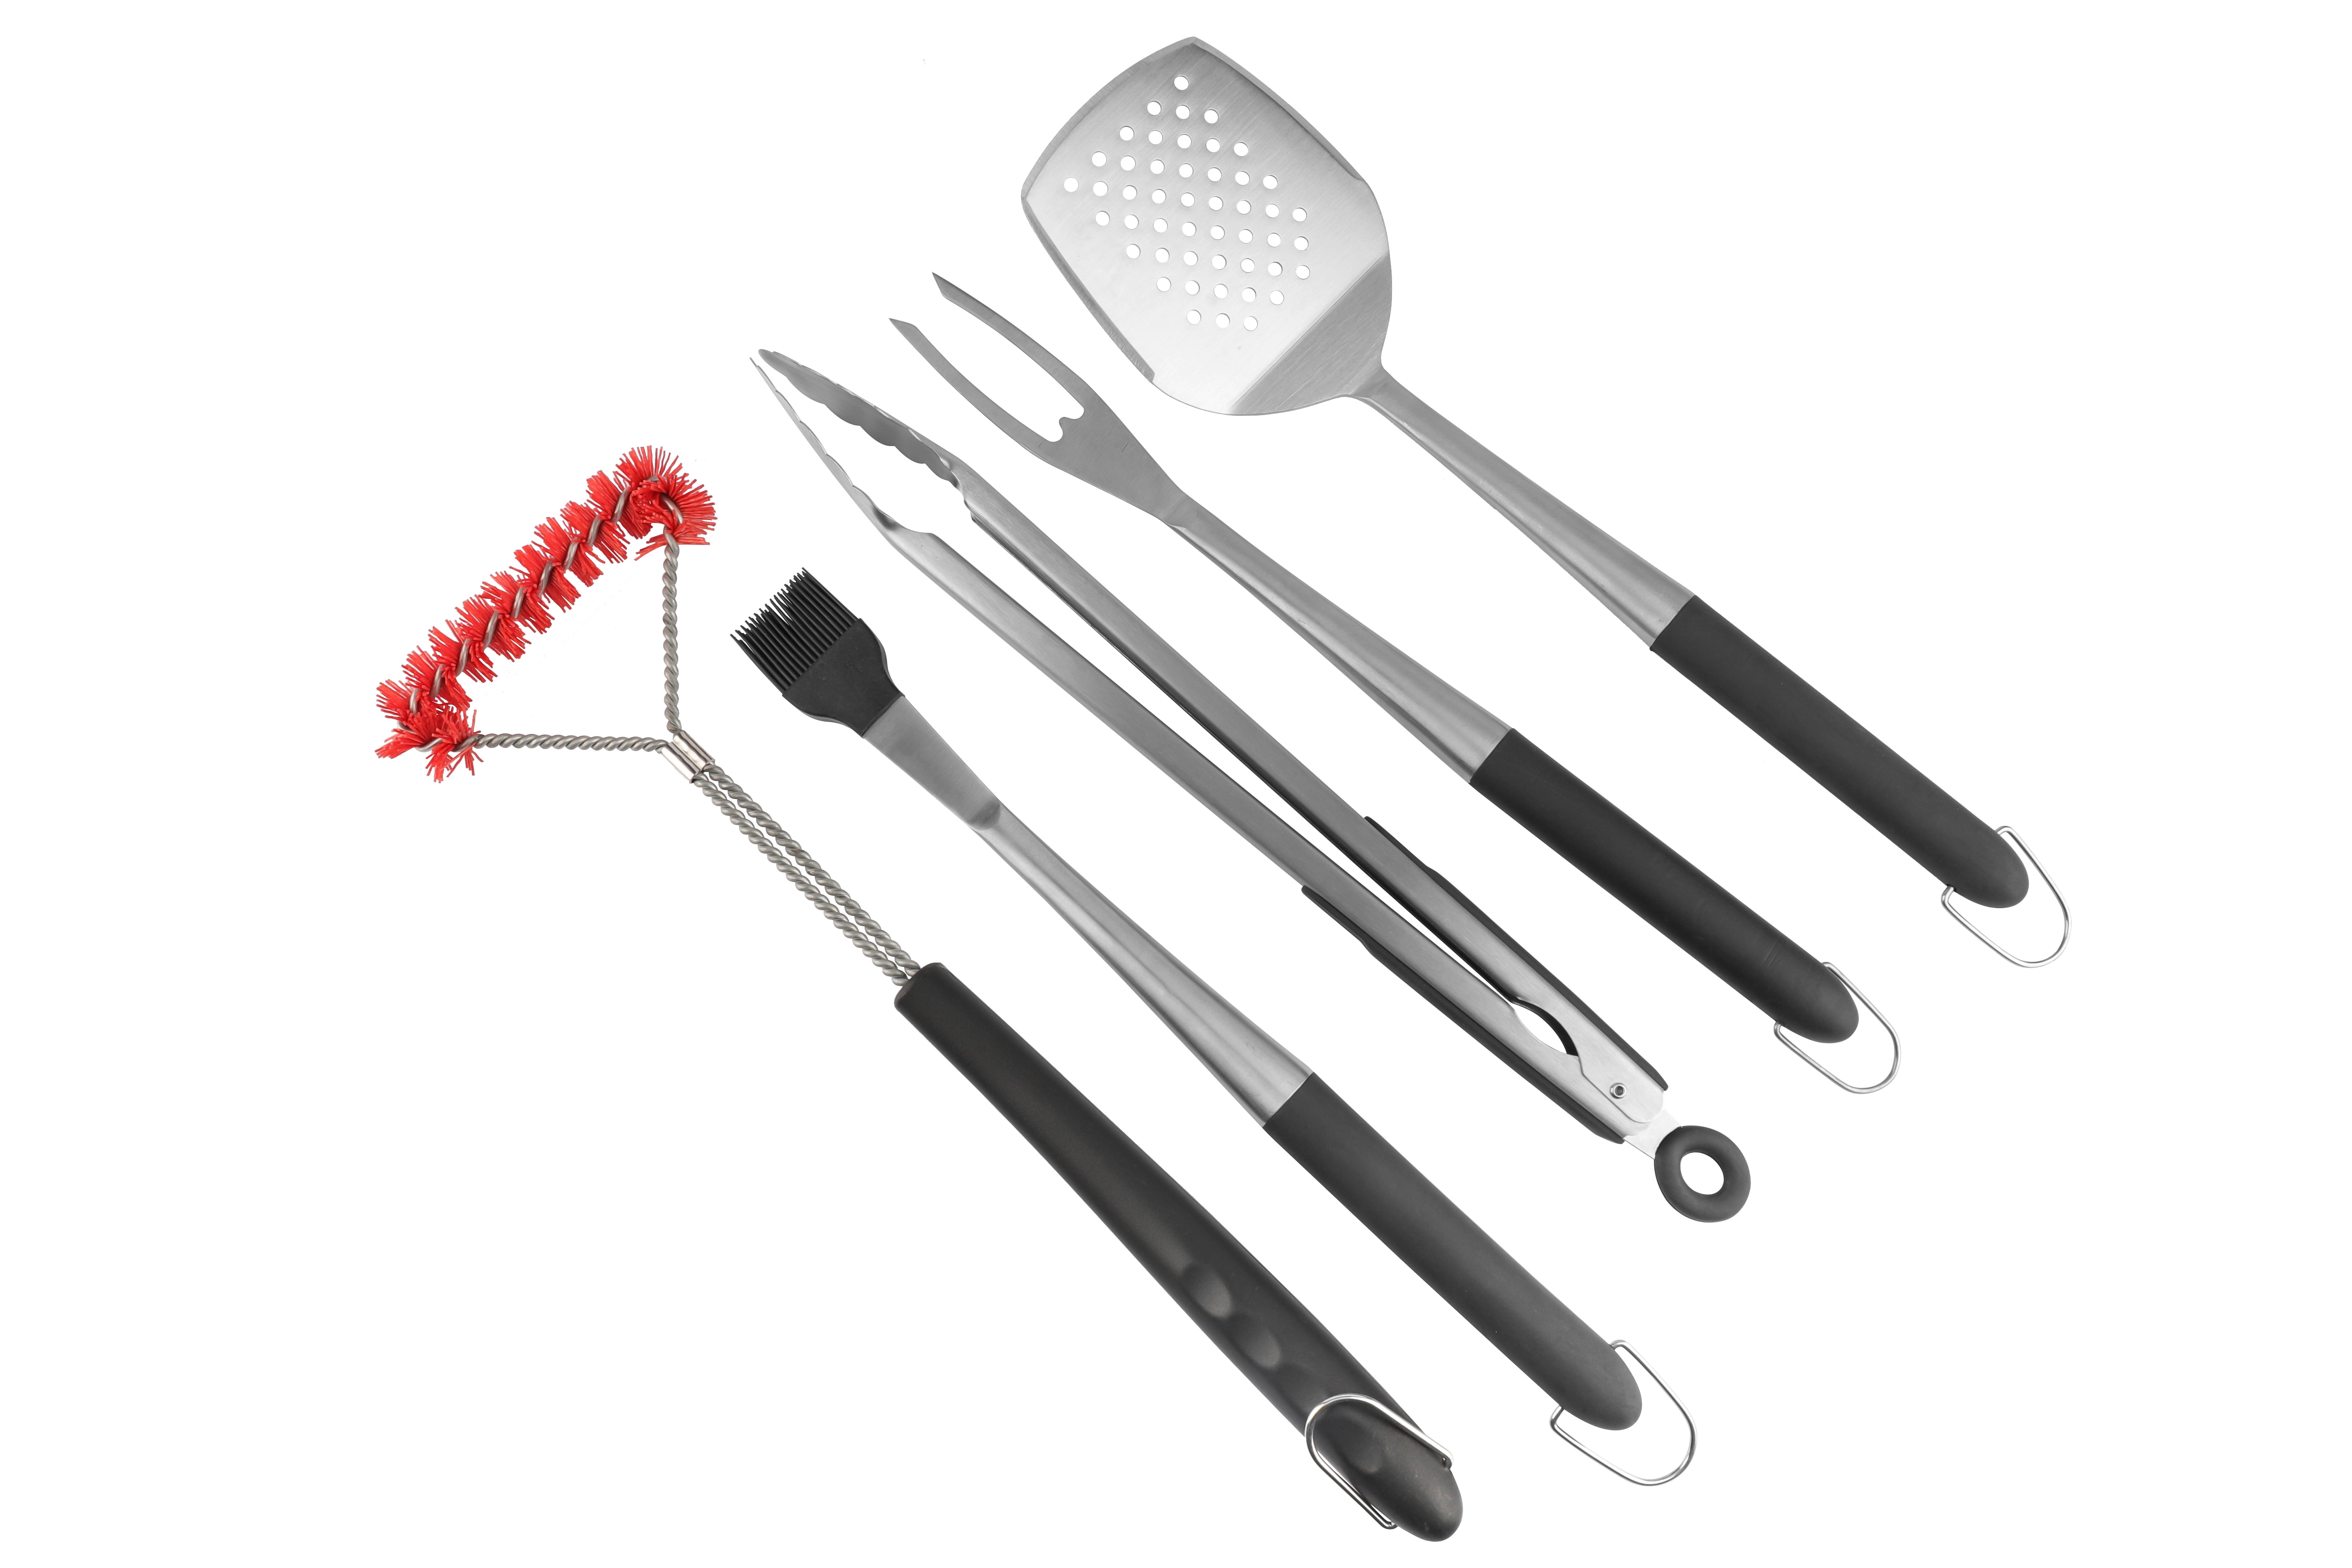 DIMEL Stainless Steel BBQ Grill Set with Multi-Use Spatula Meat Fork, Tongs 